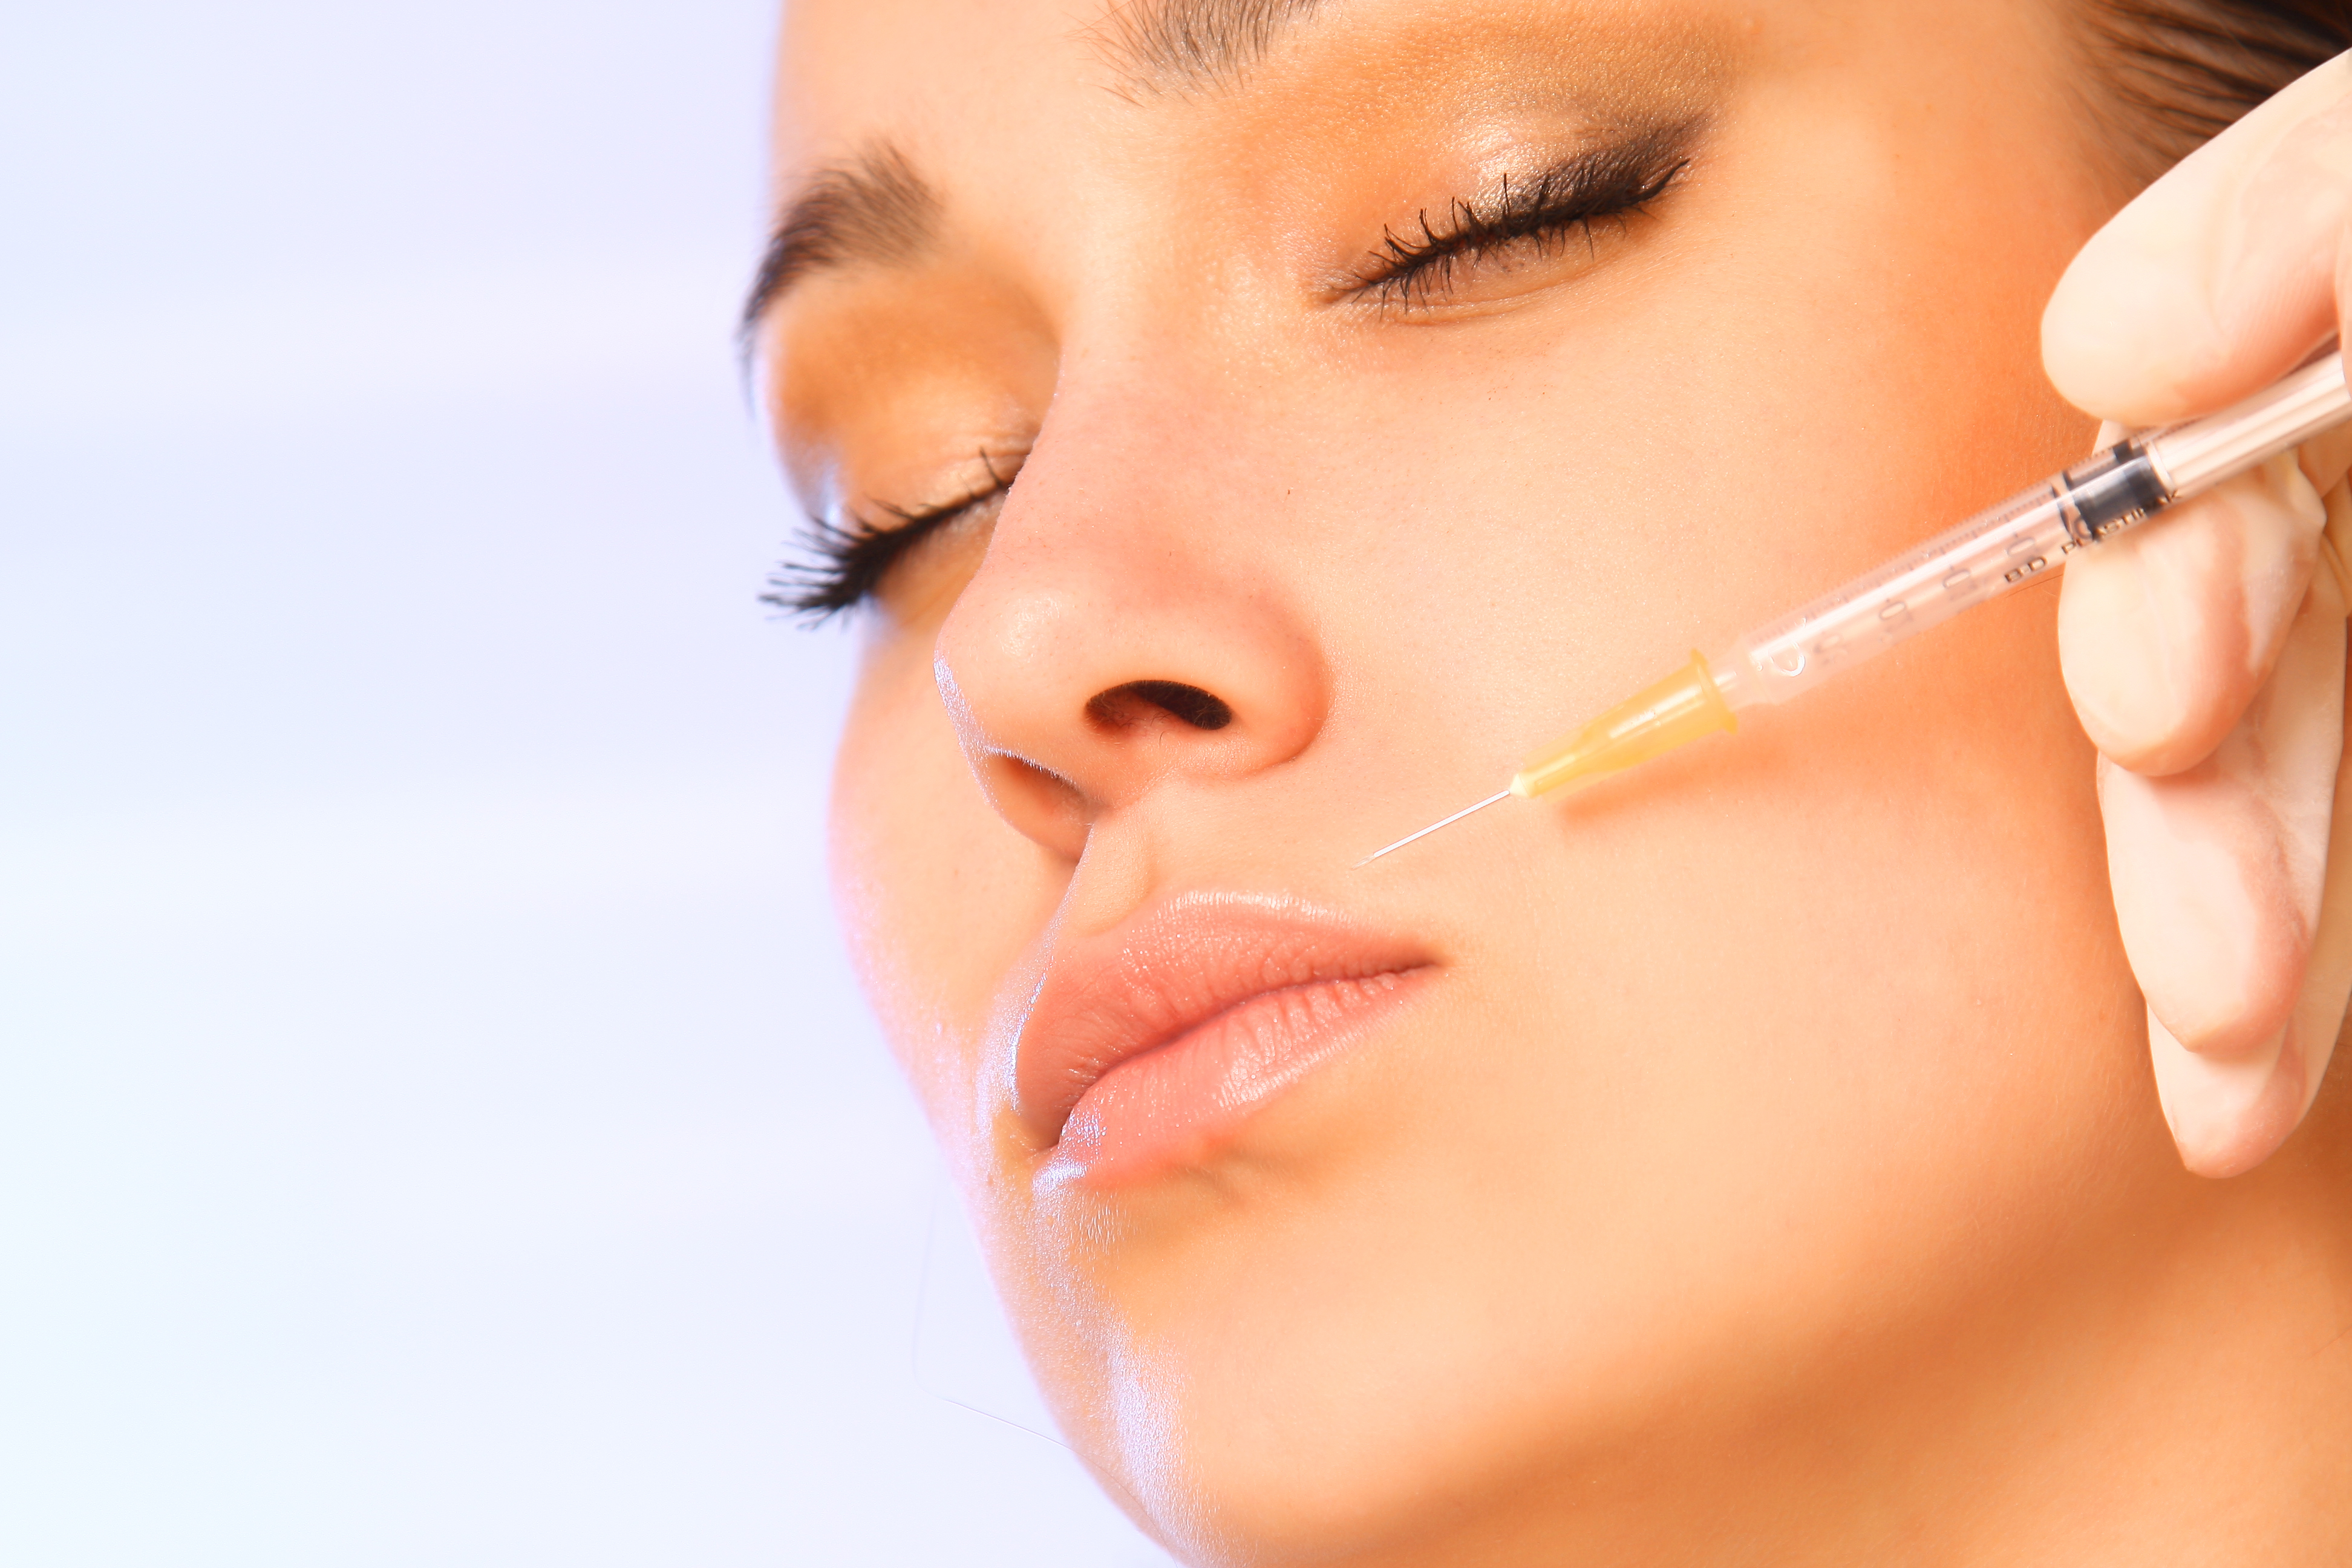 All That You Need to Know about Fillers and How They Can Help You Look Younger